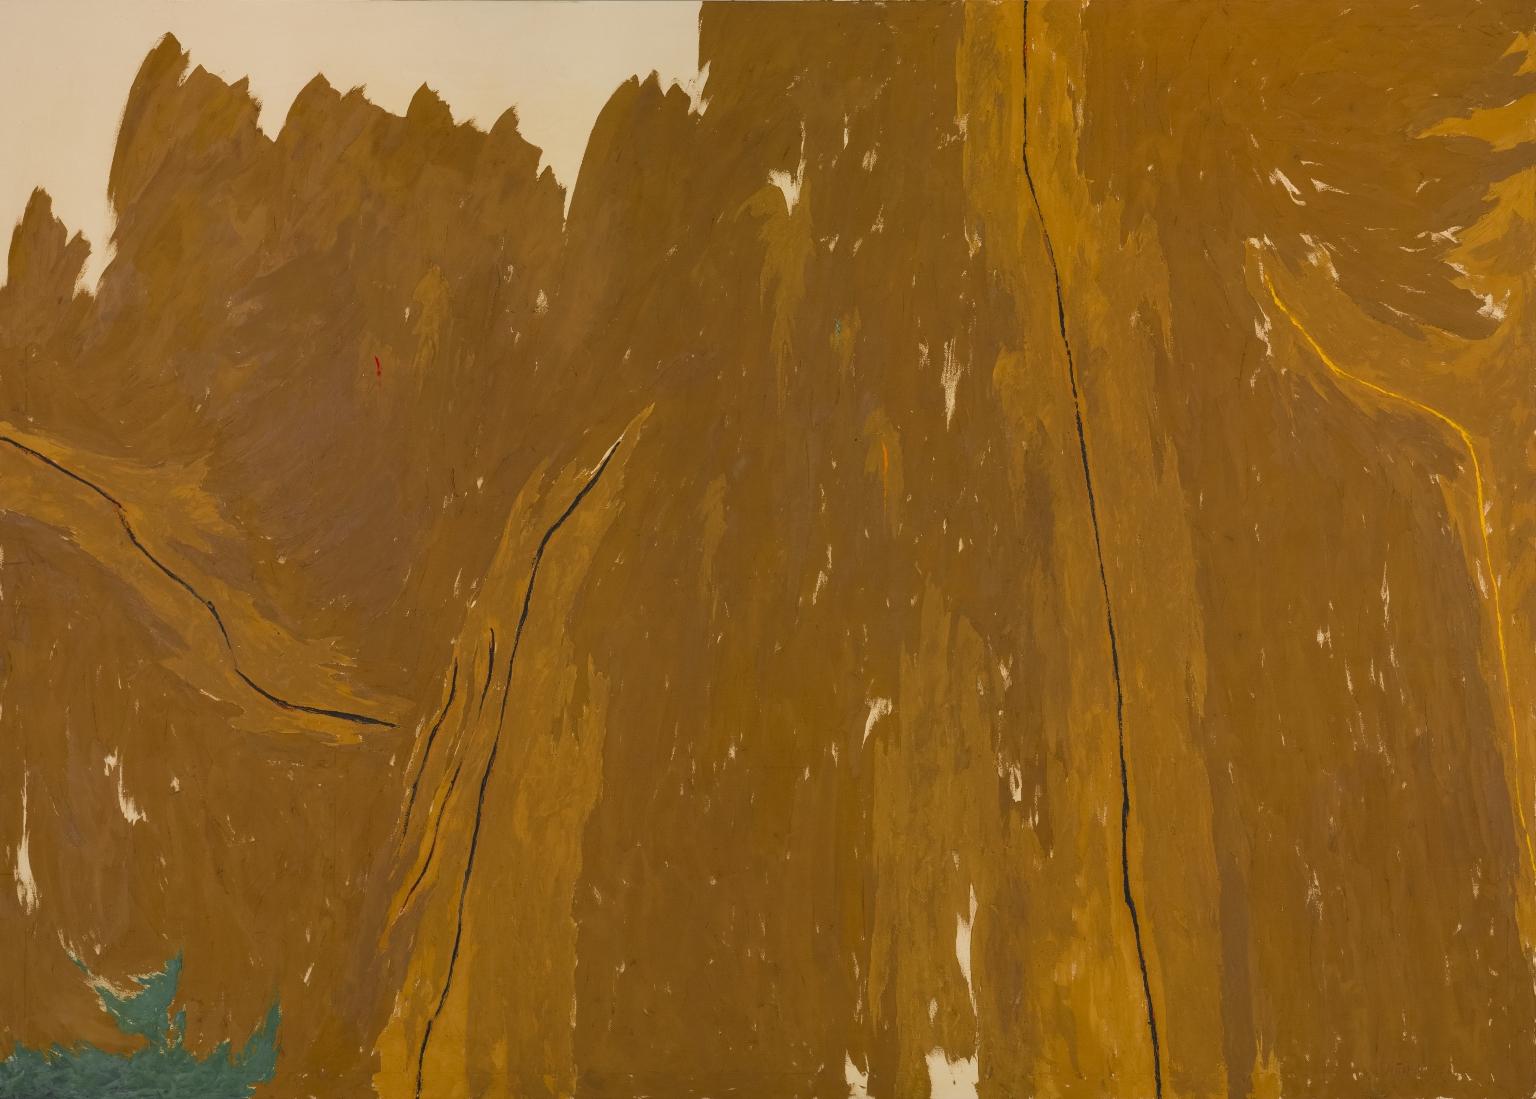 Abstract painting with brown and tan paint with paint moving upwards